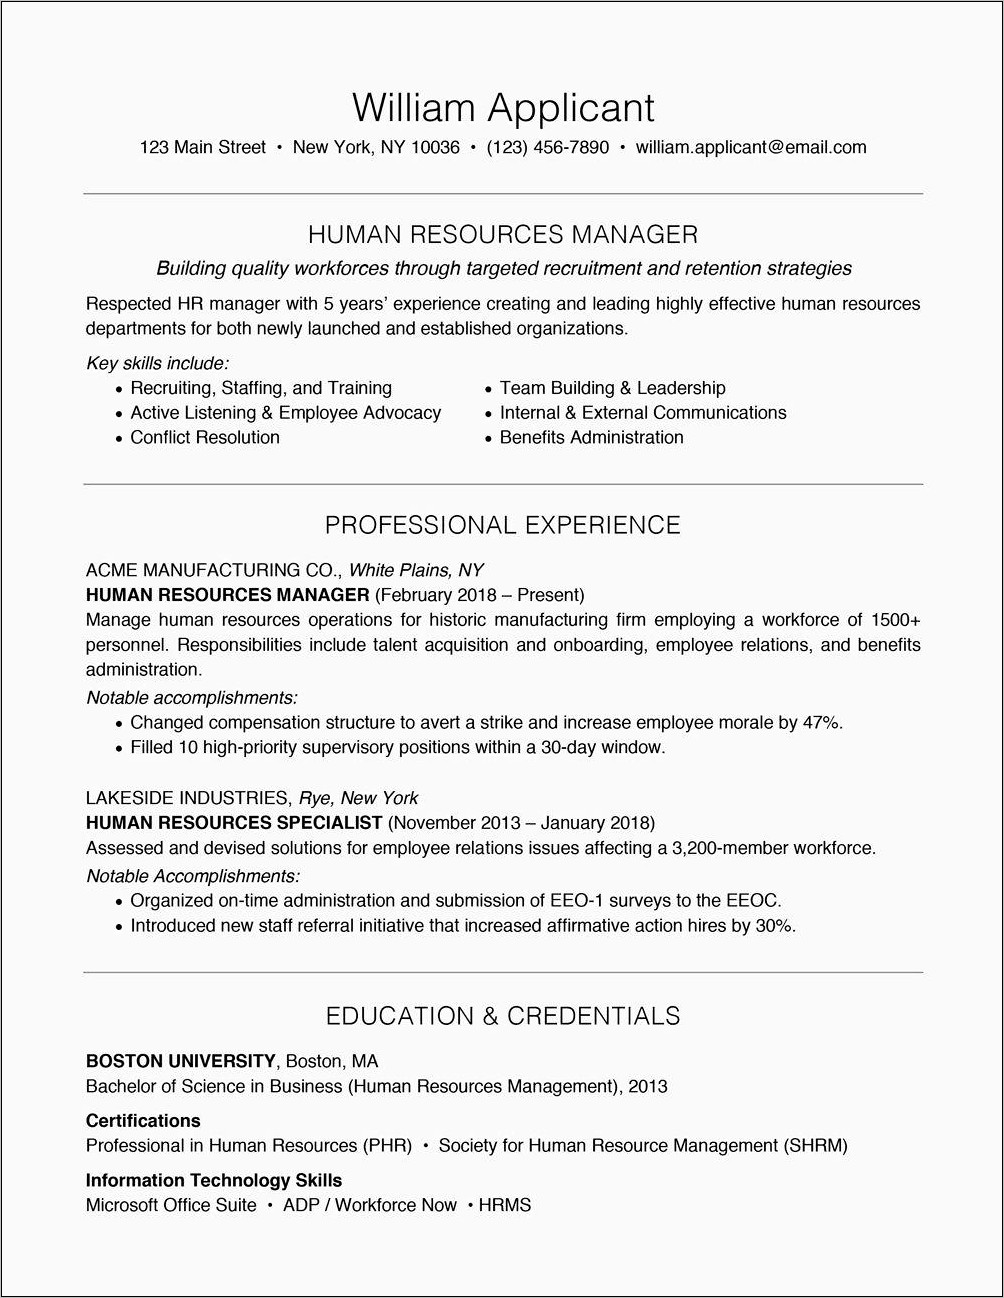 Human Resources Specialist Objective Resume